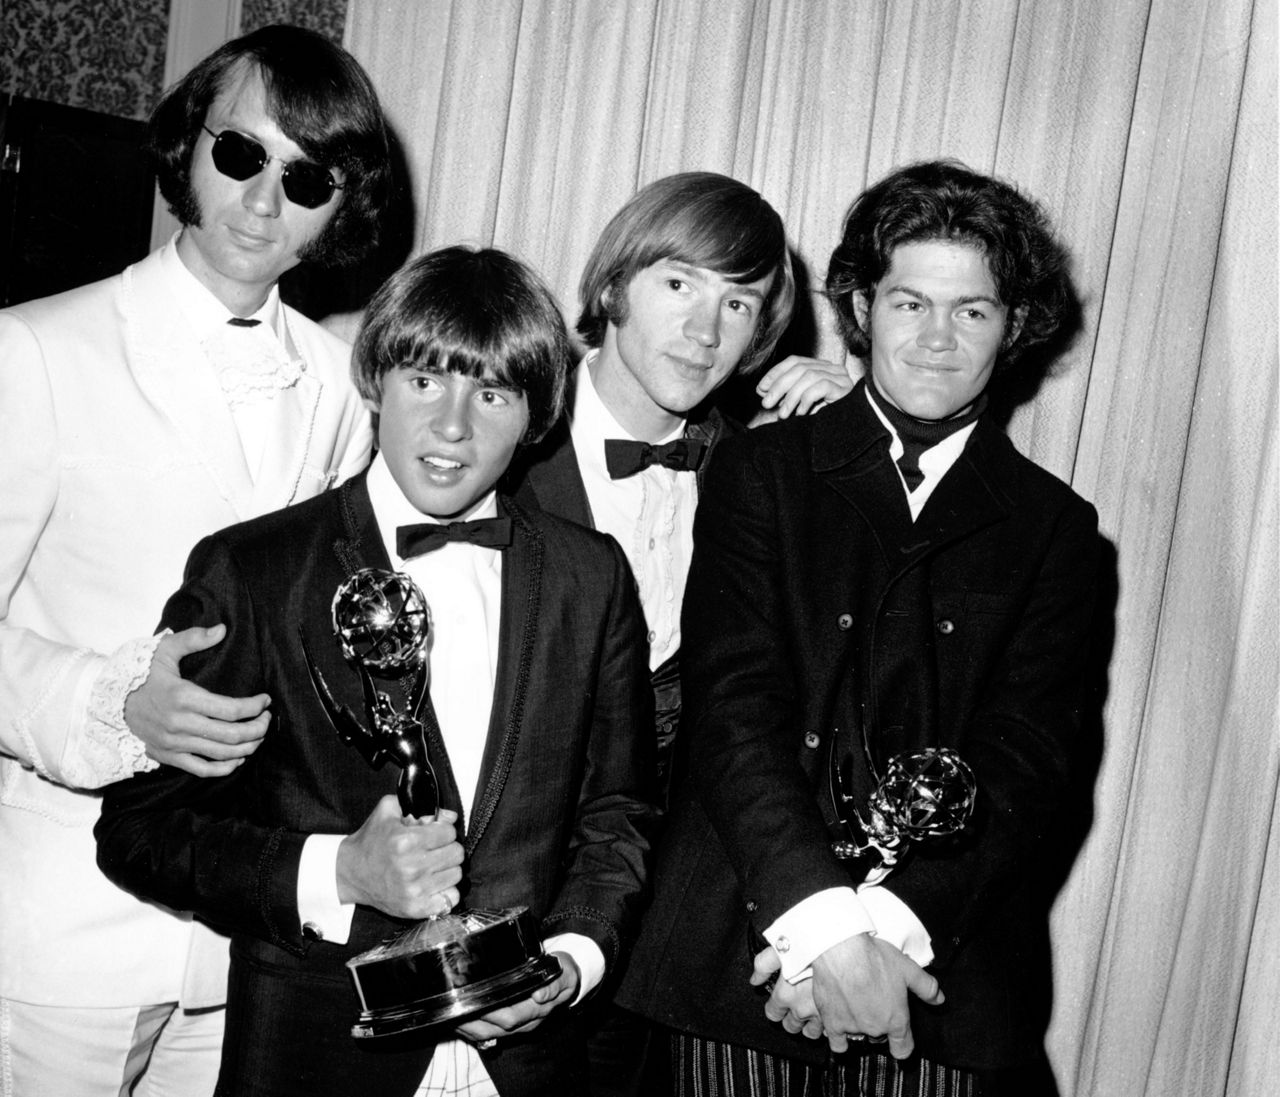 The Monkees pose with their Emmy award at the 19th Annual Primetime Emmy Awards in Calif. on June 4, 1967. They won for best comedy series and best comedy direction for their television program "The Monkees." The group members are, from left to right, Mike Nesmith, Davy Jones, Peter Tork, and Micky Dolenz. (AP Photo)